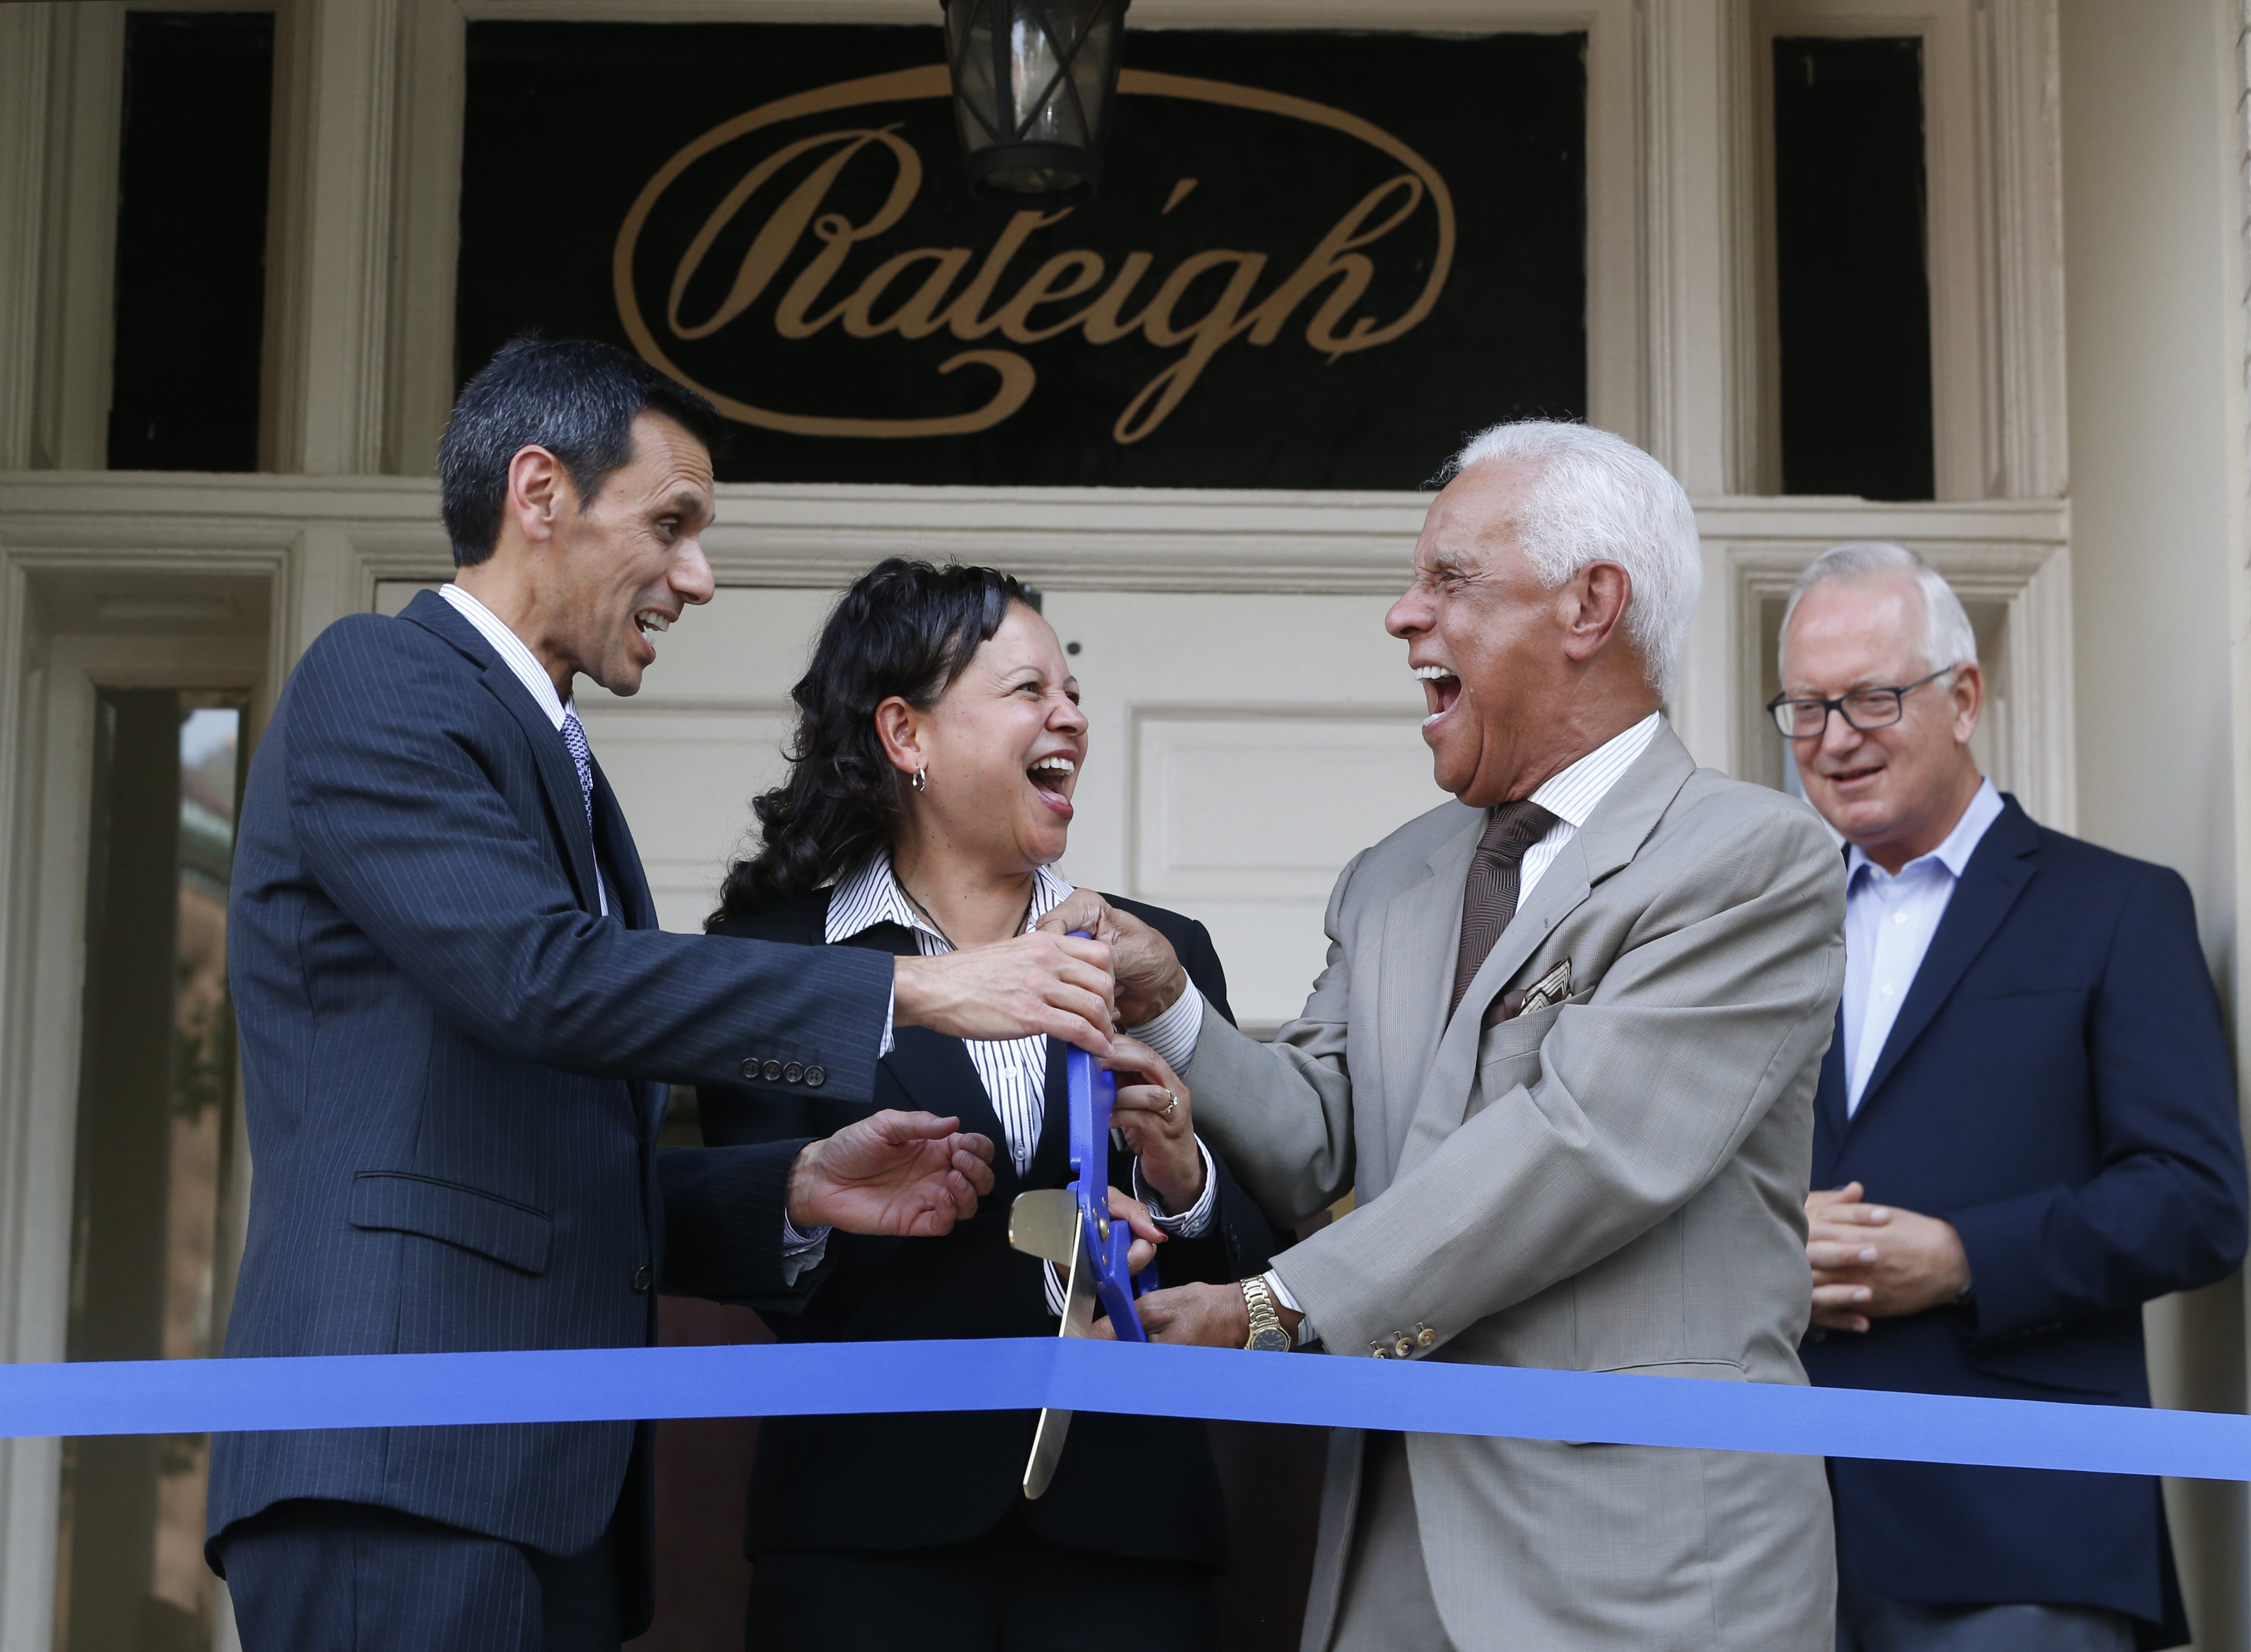 VCU President Michael Rao, Ph.D., Interim Dean Susan Gooden, Ph.D., Governor L. Douglas Wilder, and Robert Holsworth, Ph.D., member of VCU's Board of Visitors, formally cut the ribbon to officially mark the opening of the Raleigh Building.